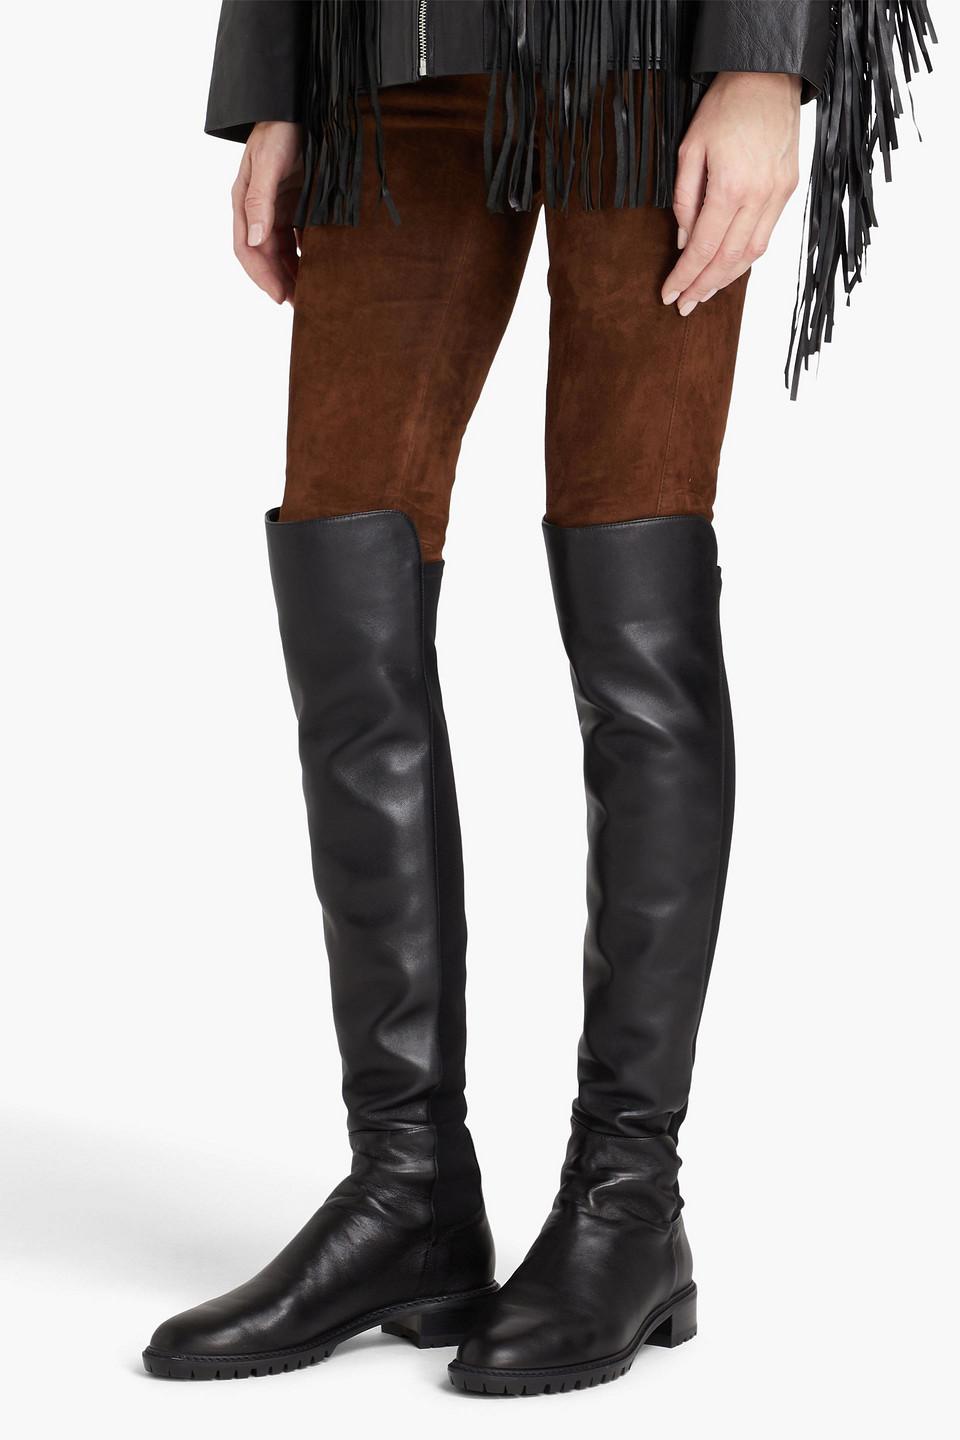 Stuart Weitzman Keelan Leather And Neoprene Over-the-knee Boots in Black |  Lyst